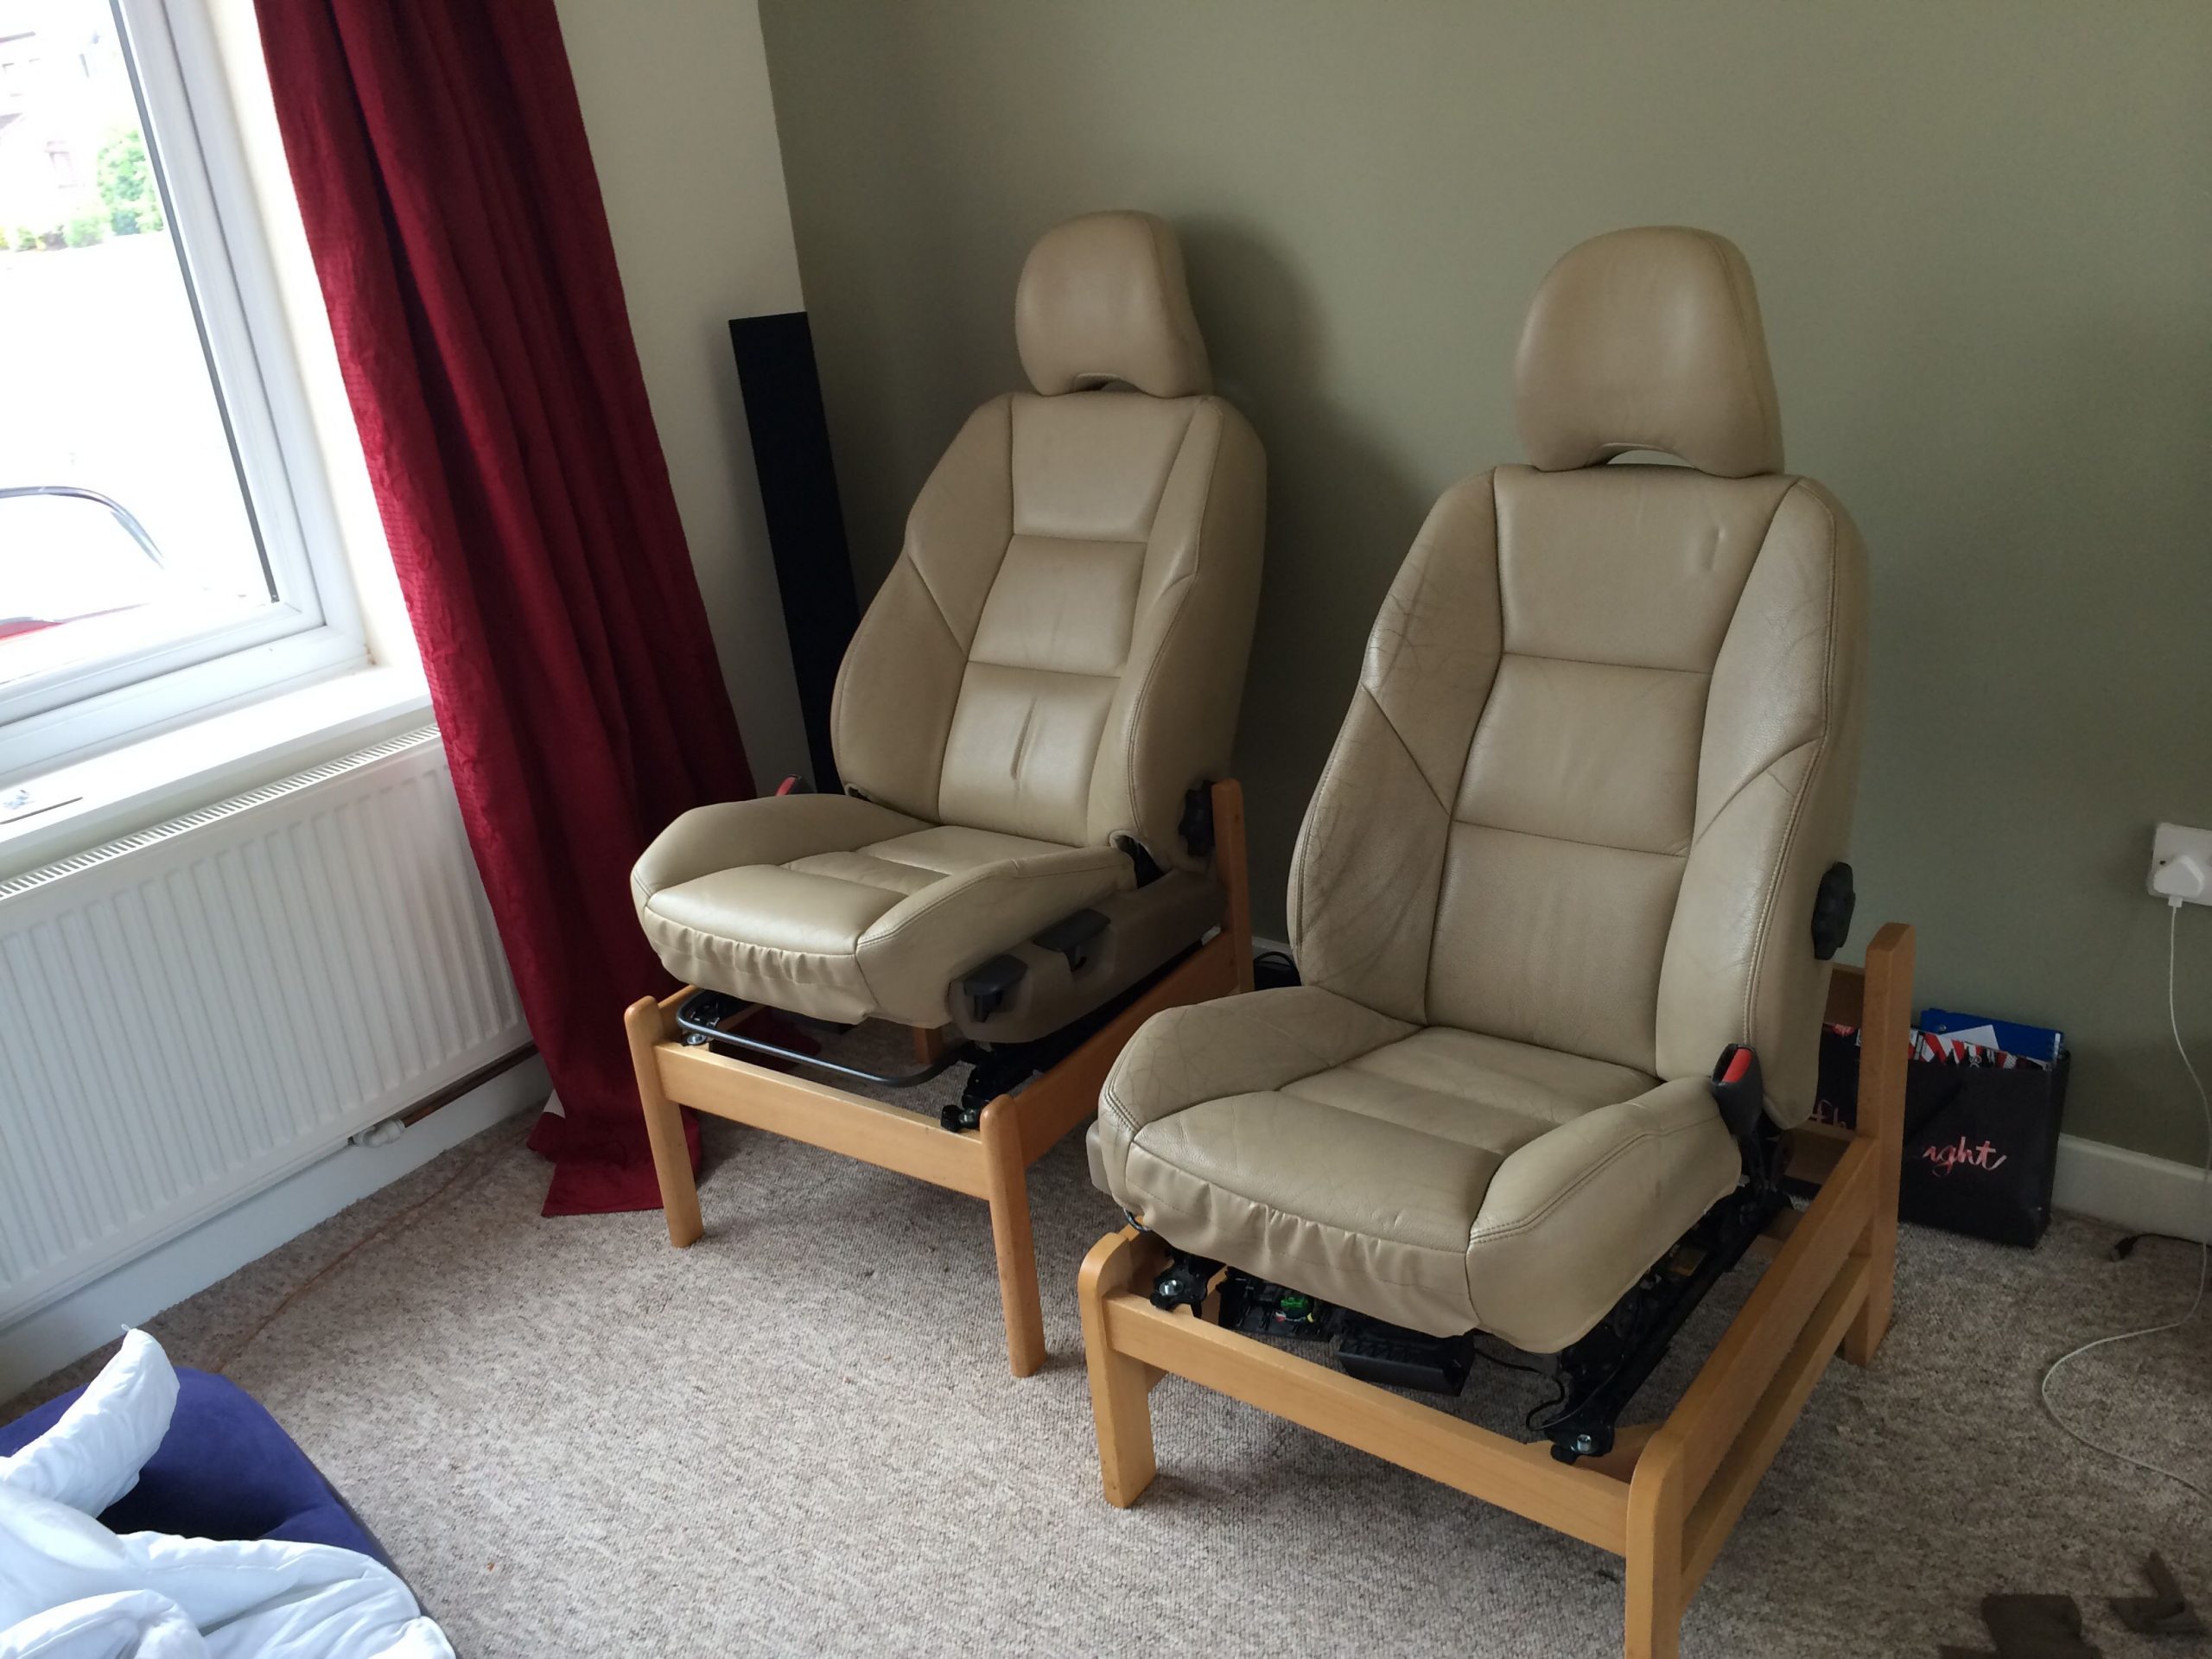 Home made car seat chairs. So comfy